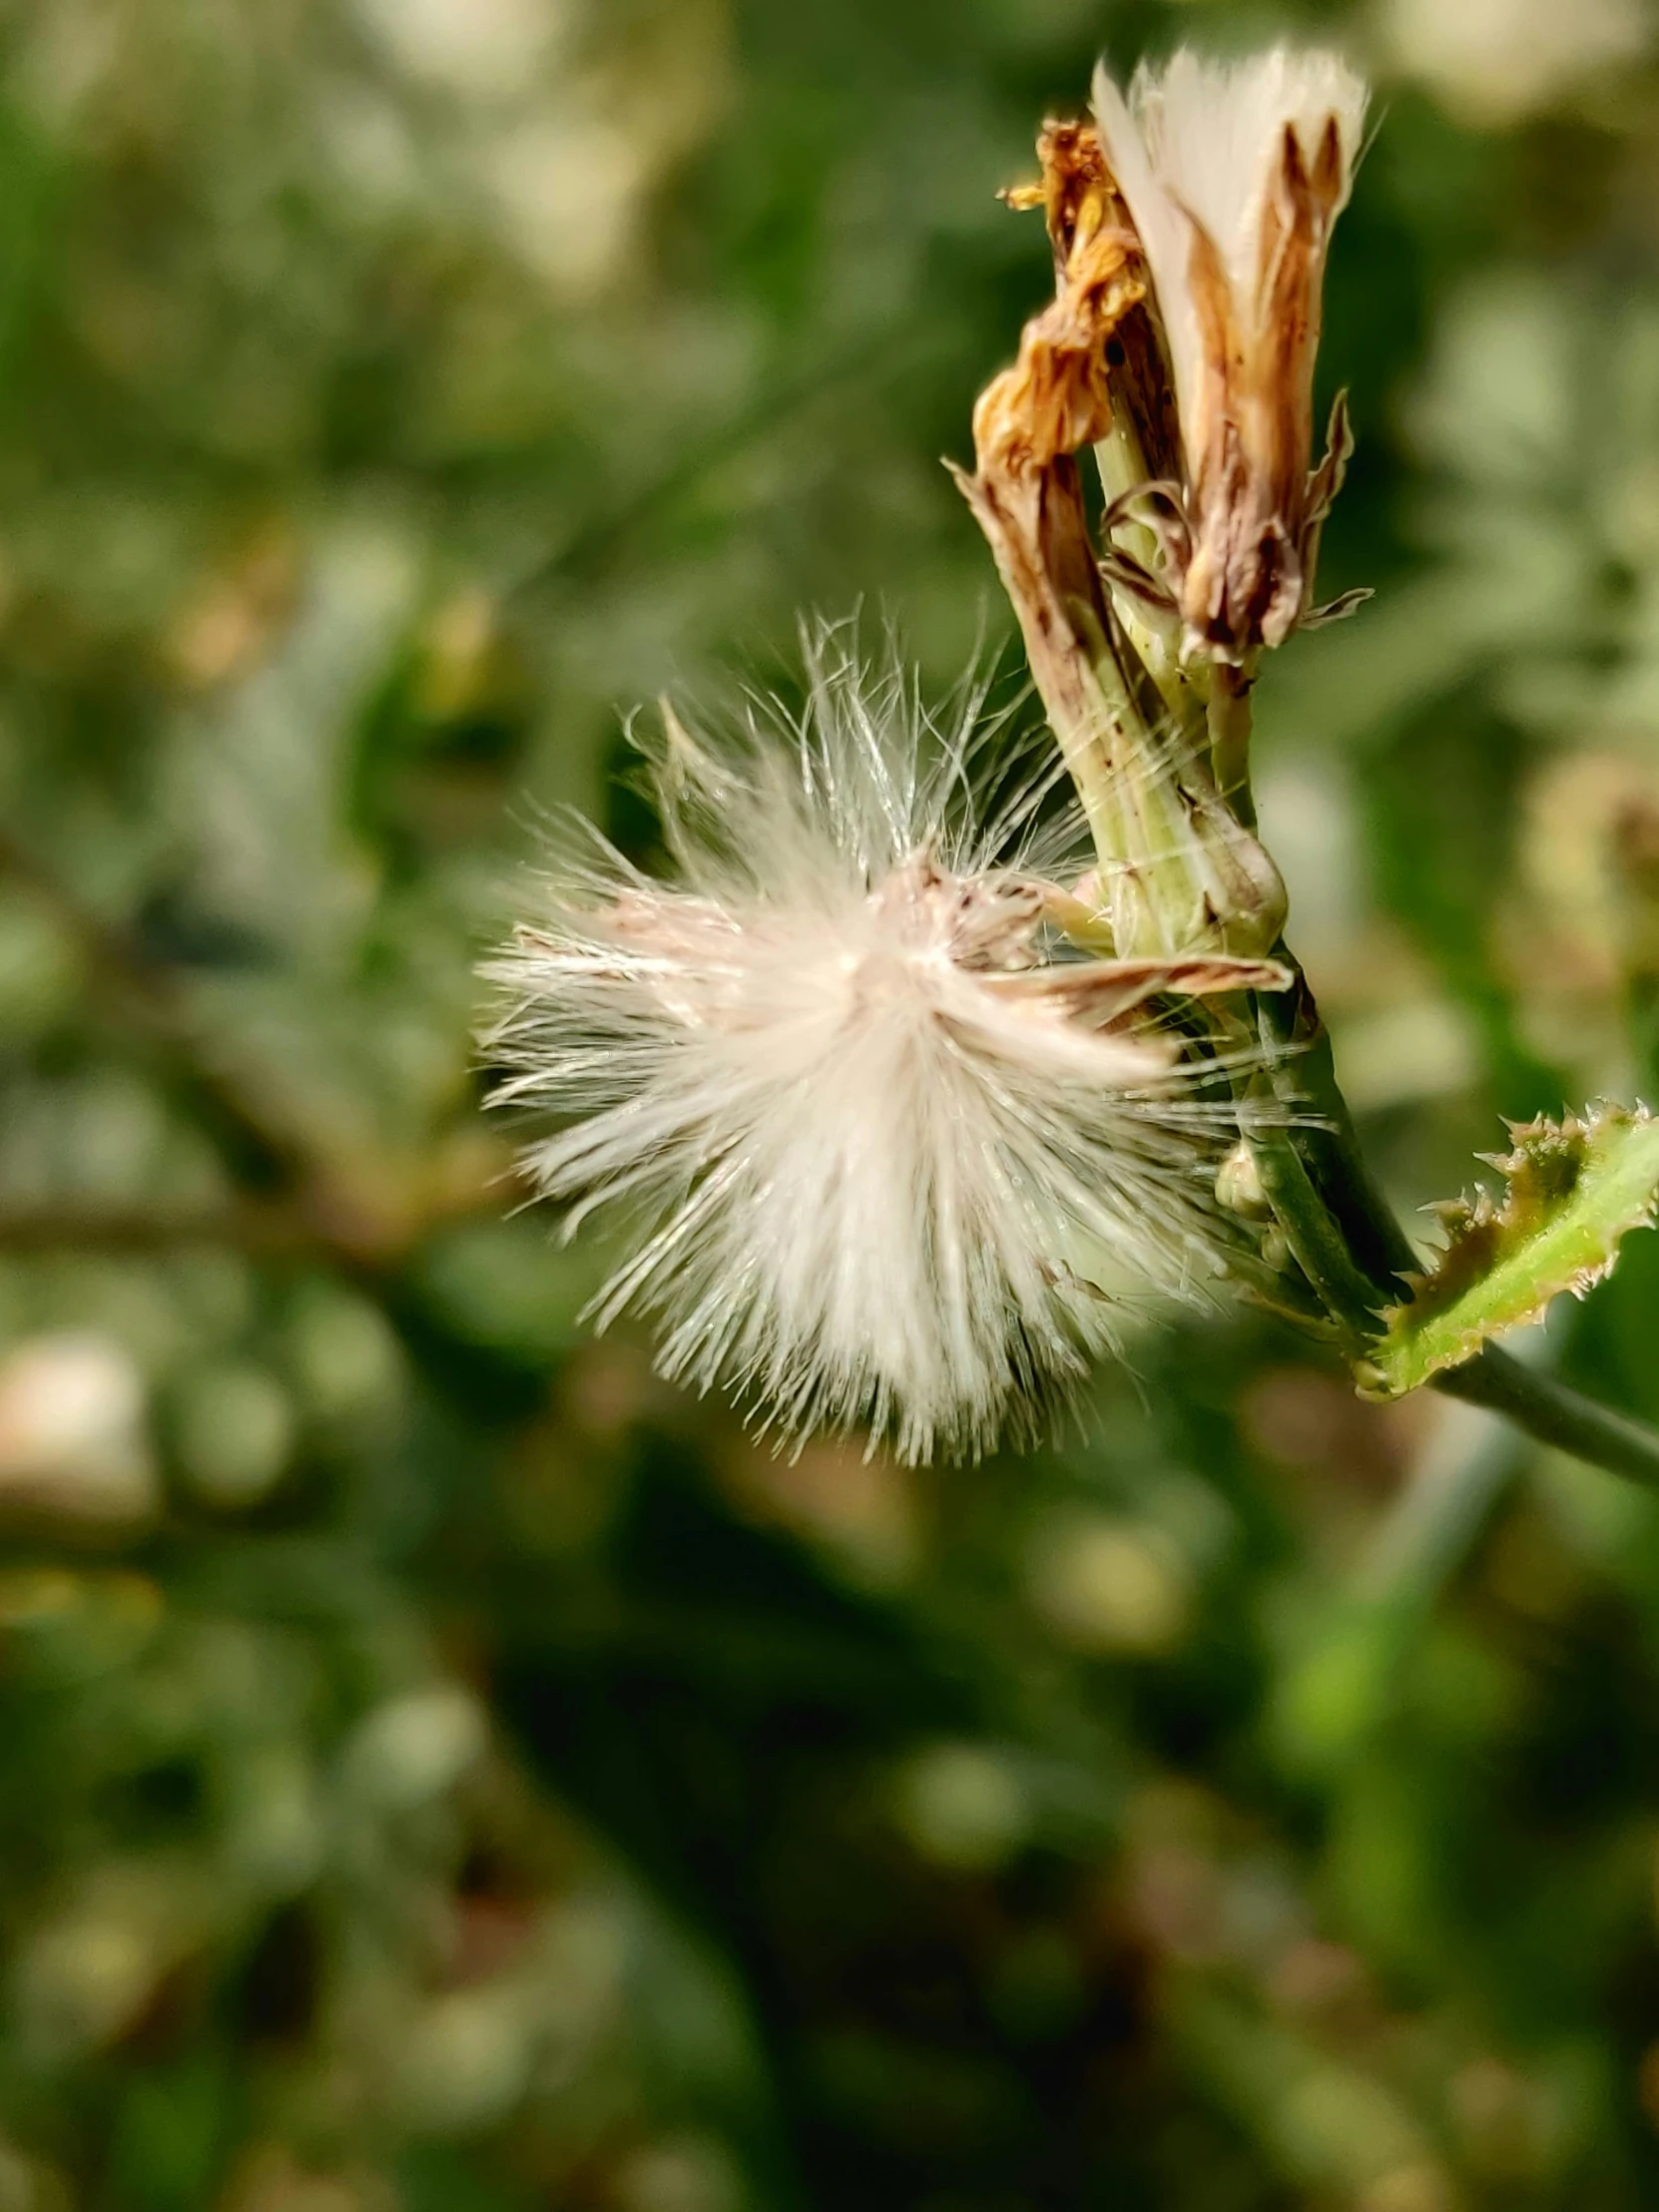 some white dandelion seeds growing on a stalk